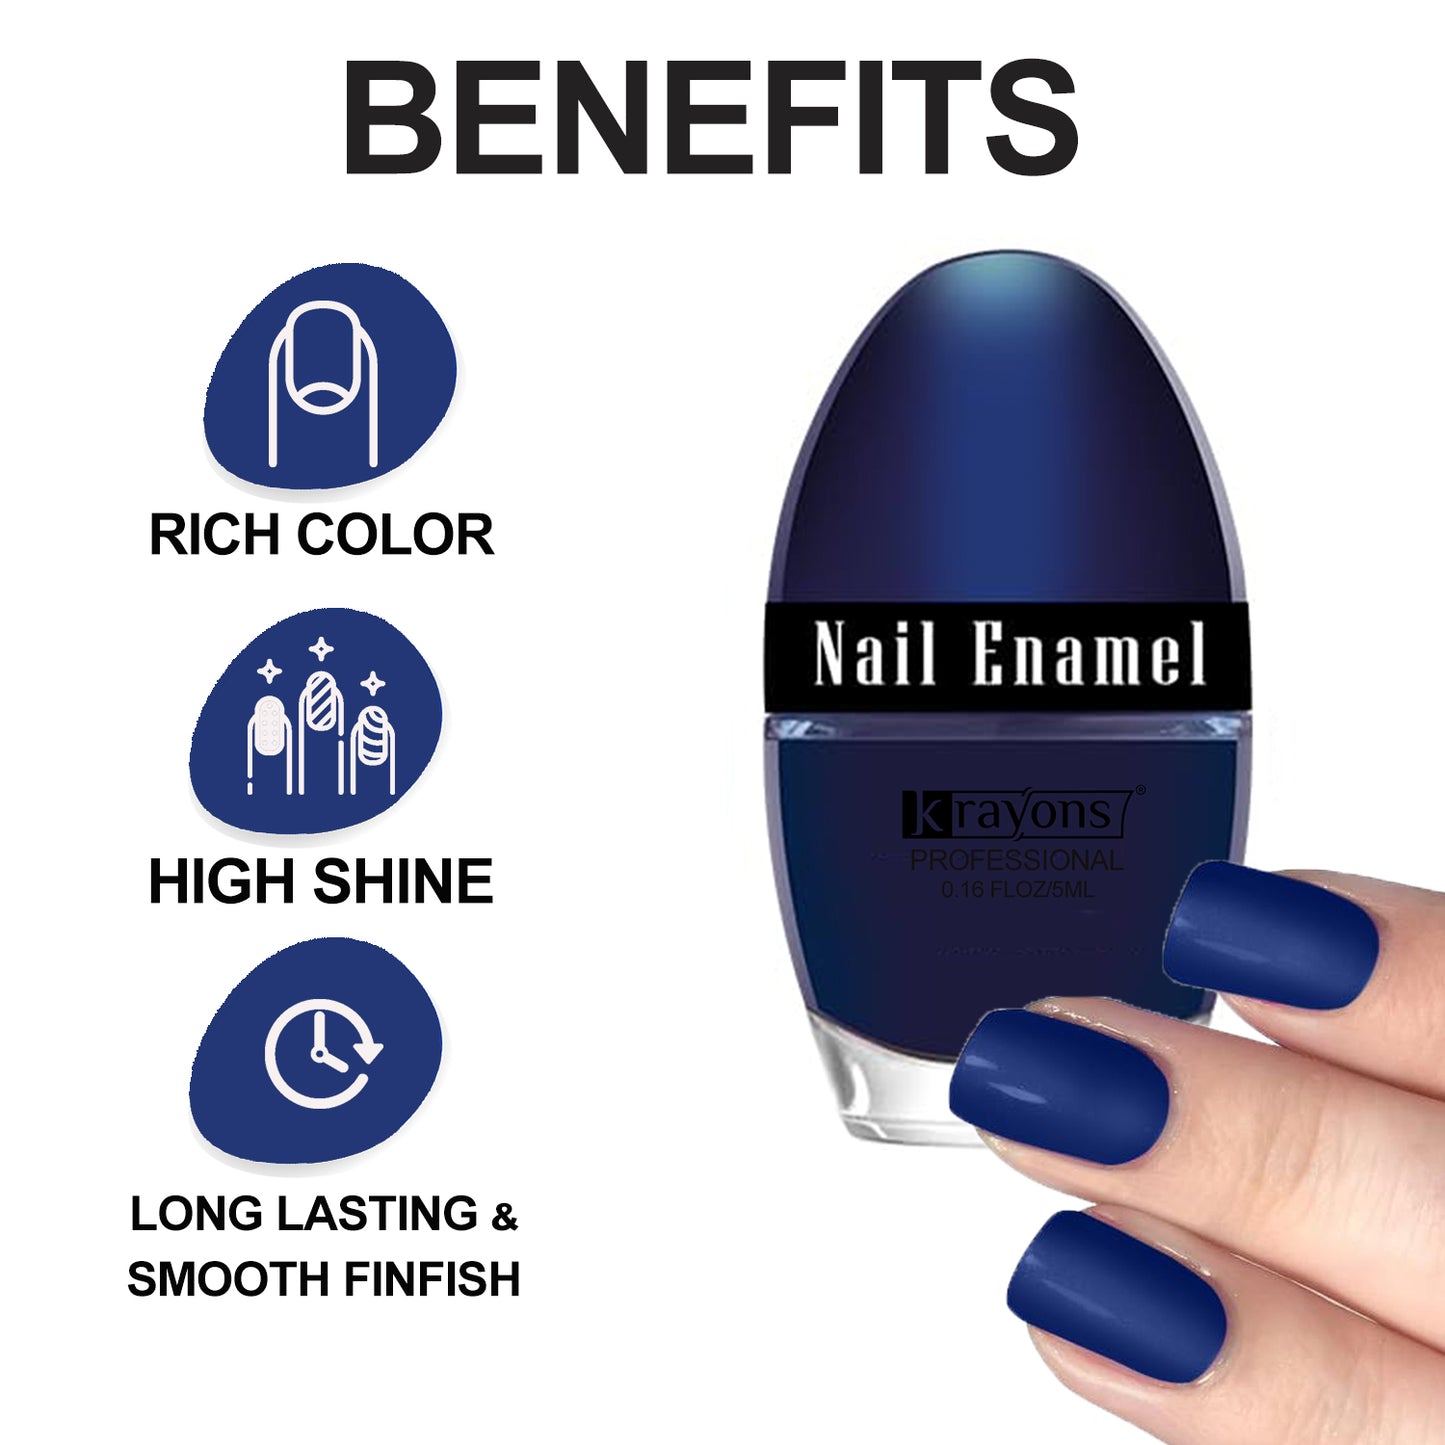 Krayons Professional Glossy Nail Paint, Blue Ink, 5ml